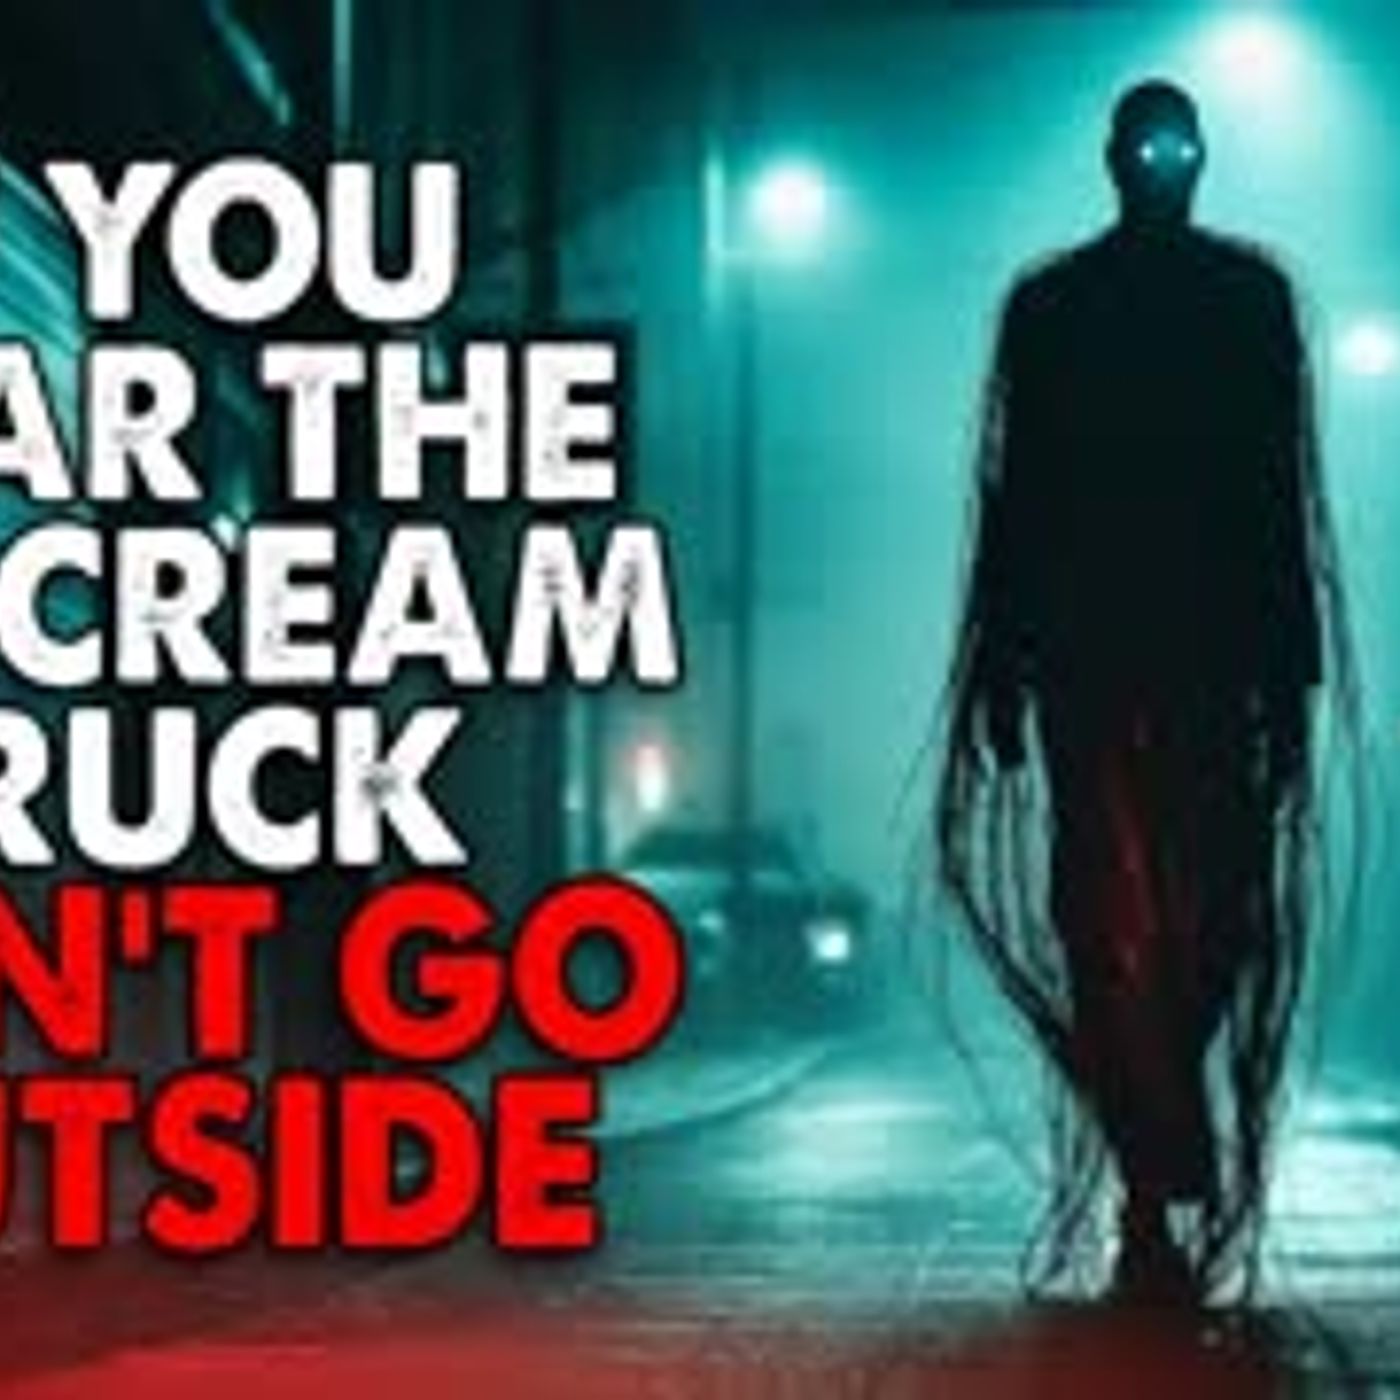 ”If You Hear the Ice-Cream Truck at Night, DON’T go outside” Creepypasta